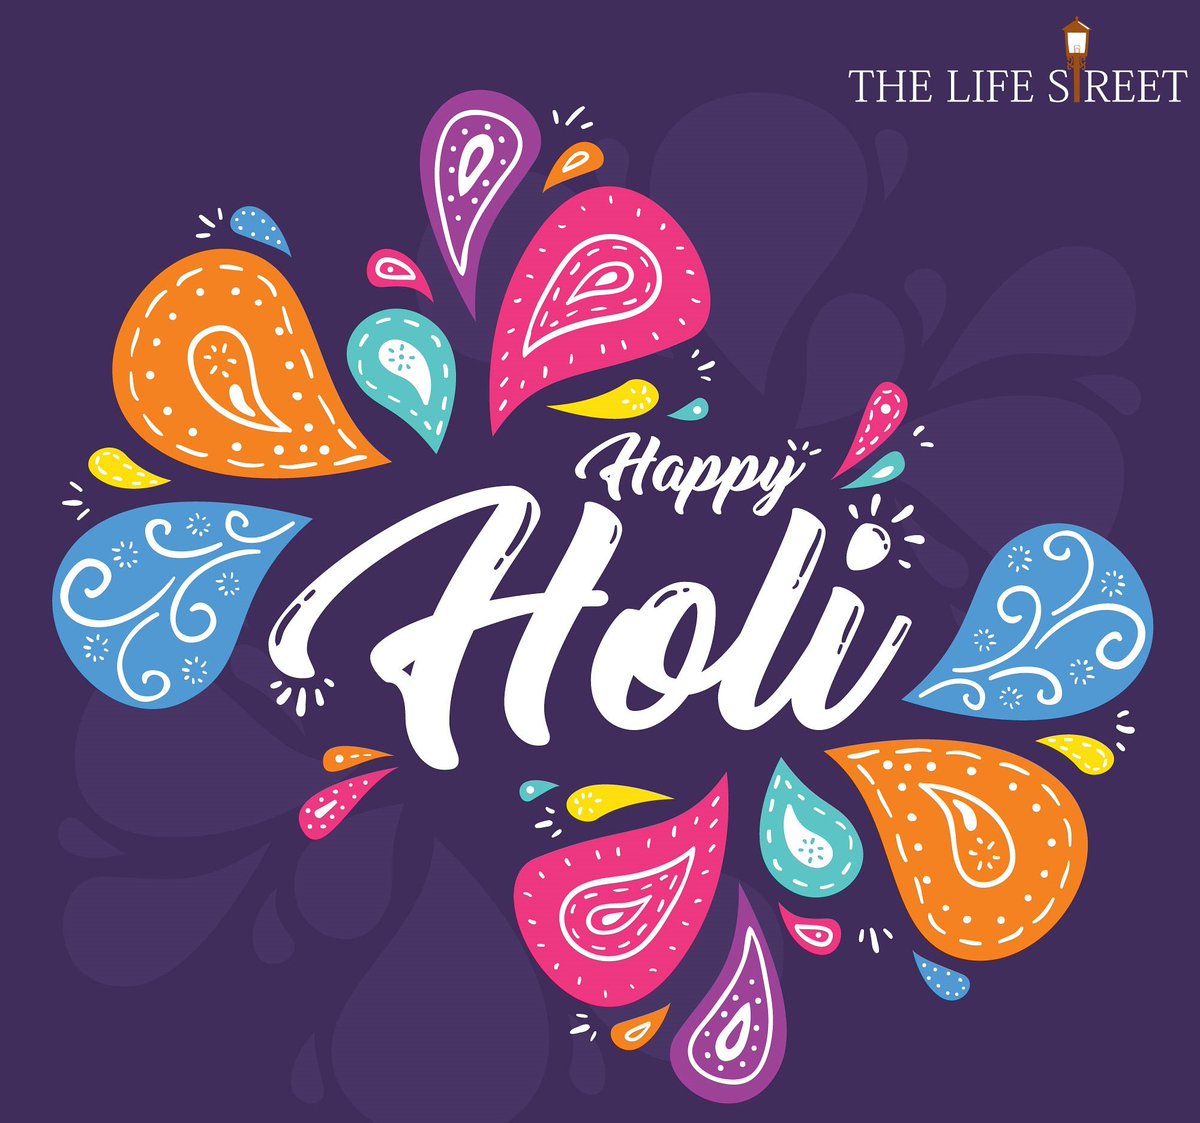 May the bright colors of this festival paint you with happiness and joy forever.
#holi #celebrations #coloursoflife #ilikeit #photooftheday #picoftheday #HappyHoli #festivalofcolors #wishinghappiness